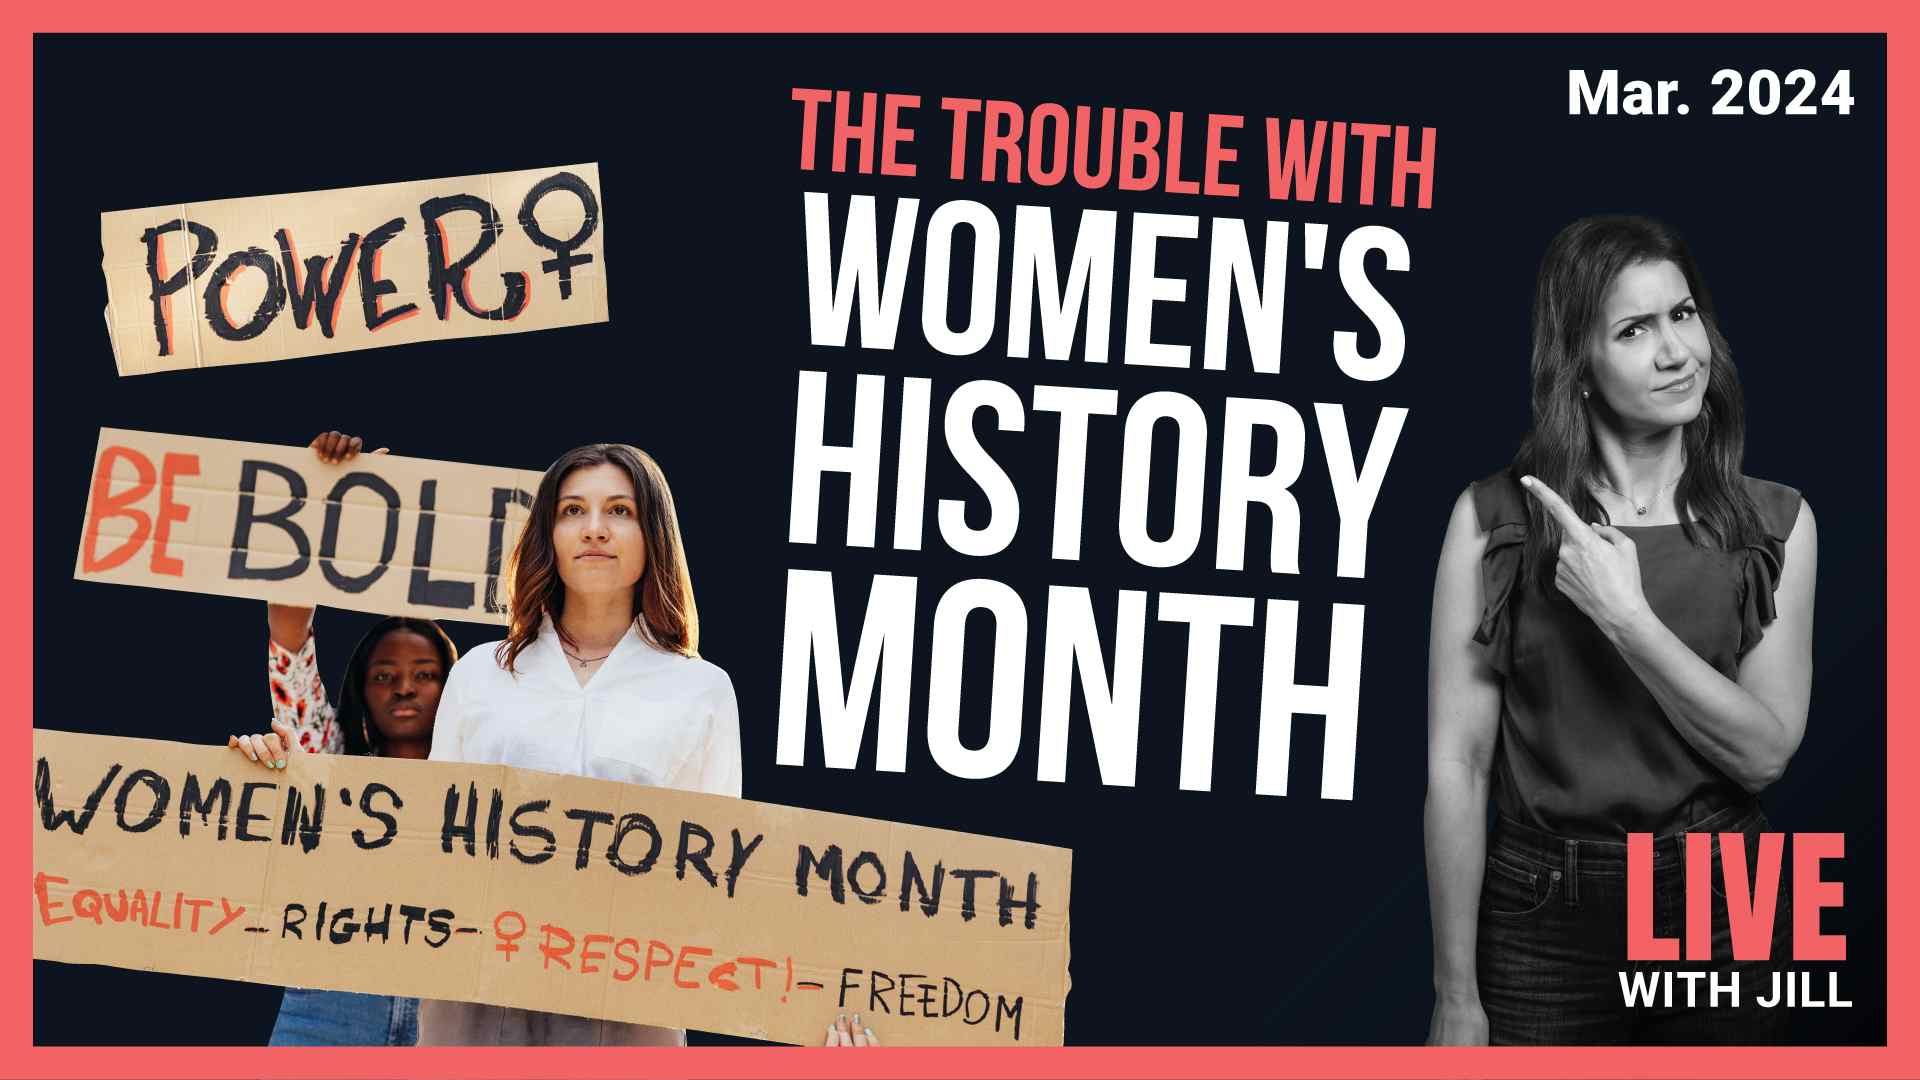 Parent Alert: The Trouble with Women's History Month